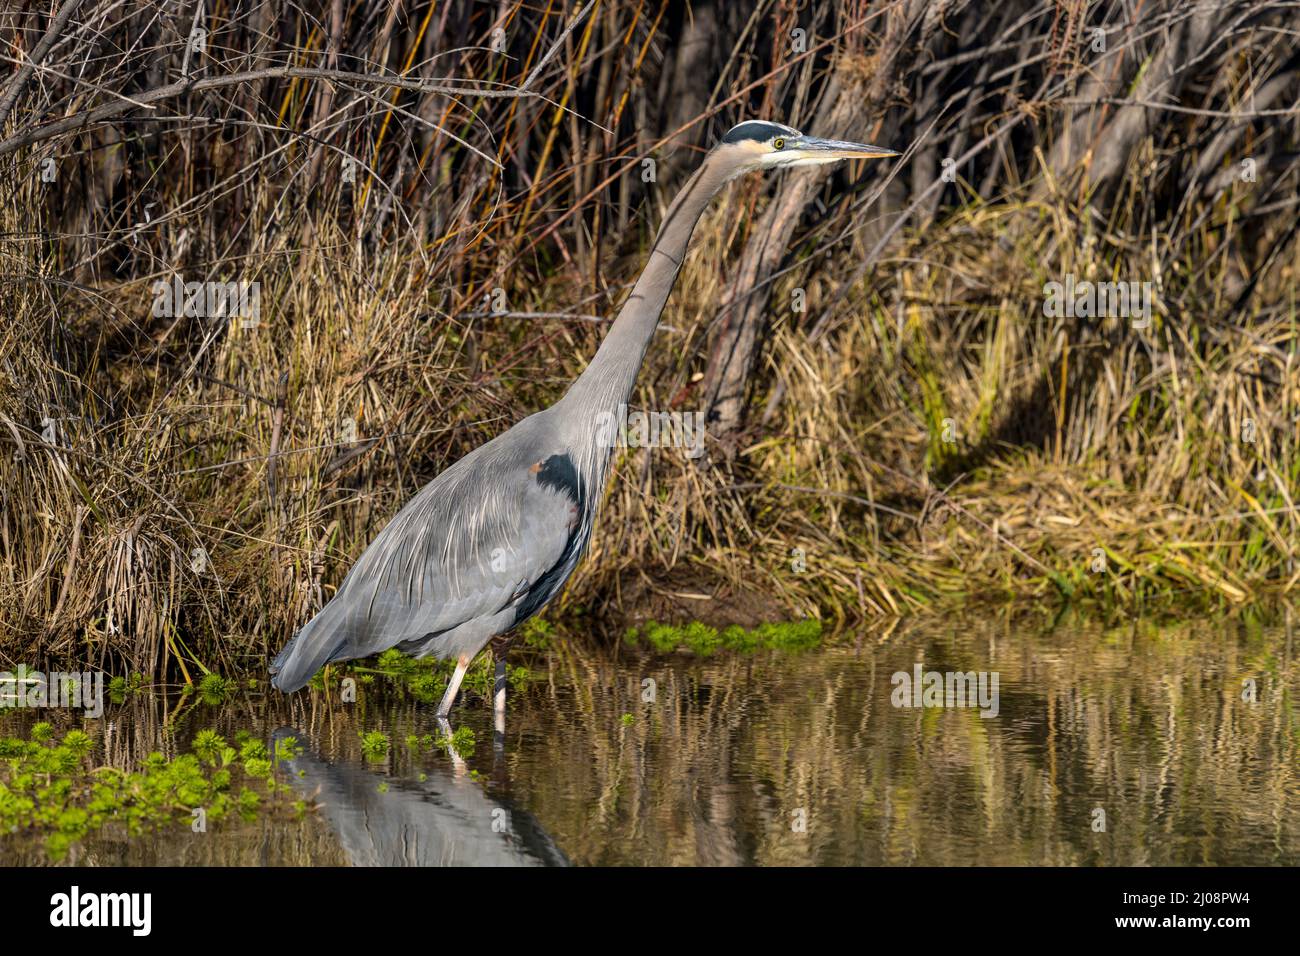 Great Blue Heron - A close-up side view of a Great Blue Heron hunting in shallow water at side of Rio Grande River. New Mexico, USA. Stock Photo